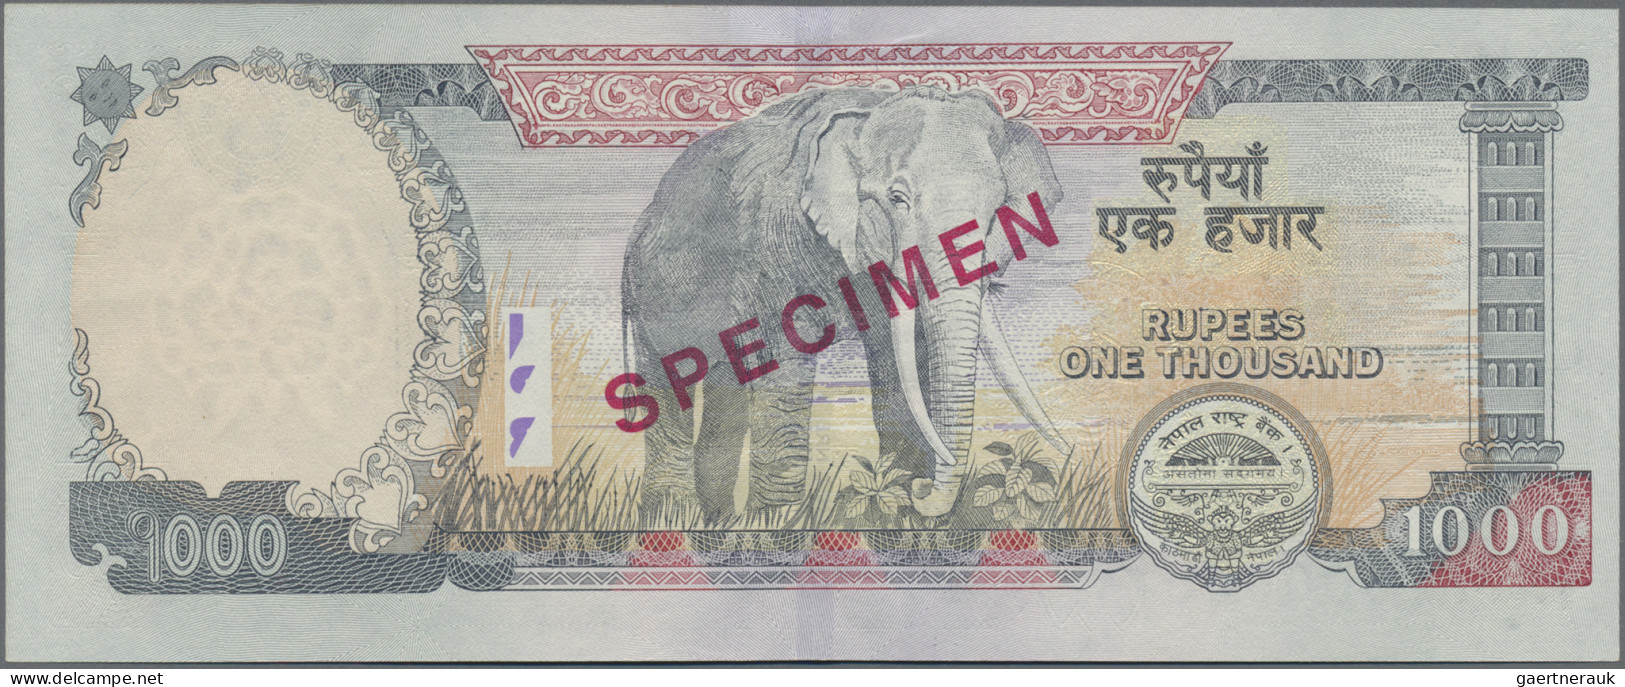 Nepal: Nepal Rastra Bank, 1.000 Rupees ND(2010) SPECIMEN, P.68as With Signature: - Nepal